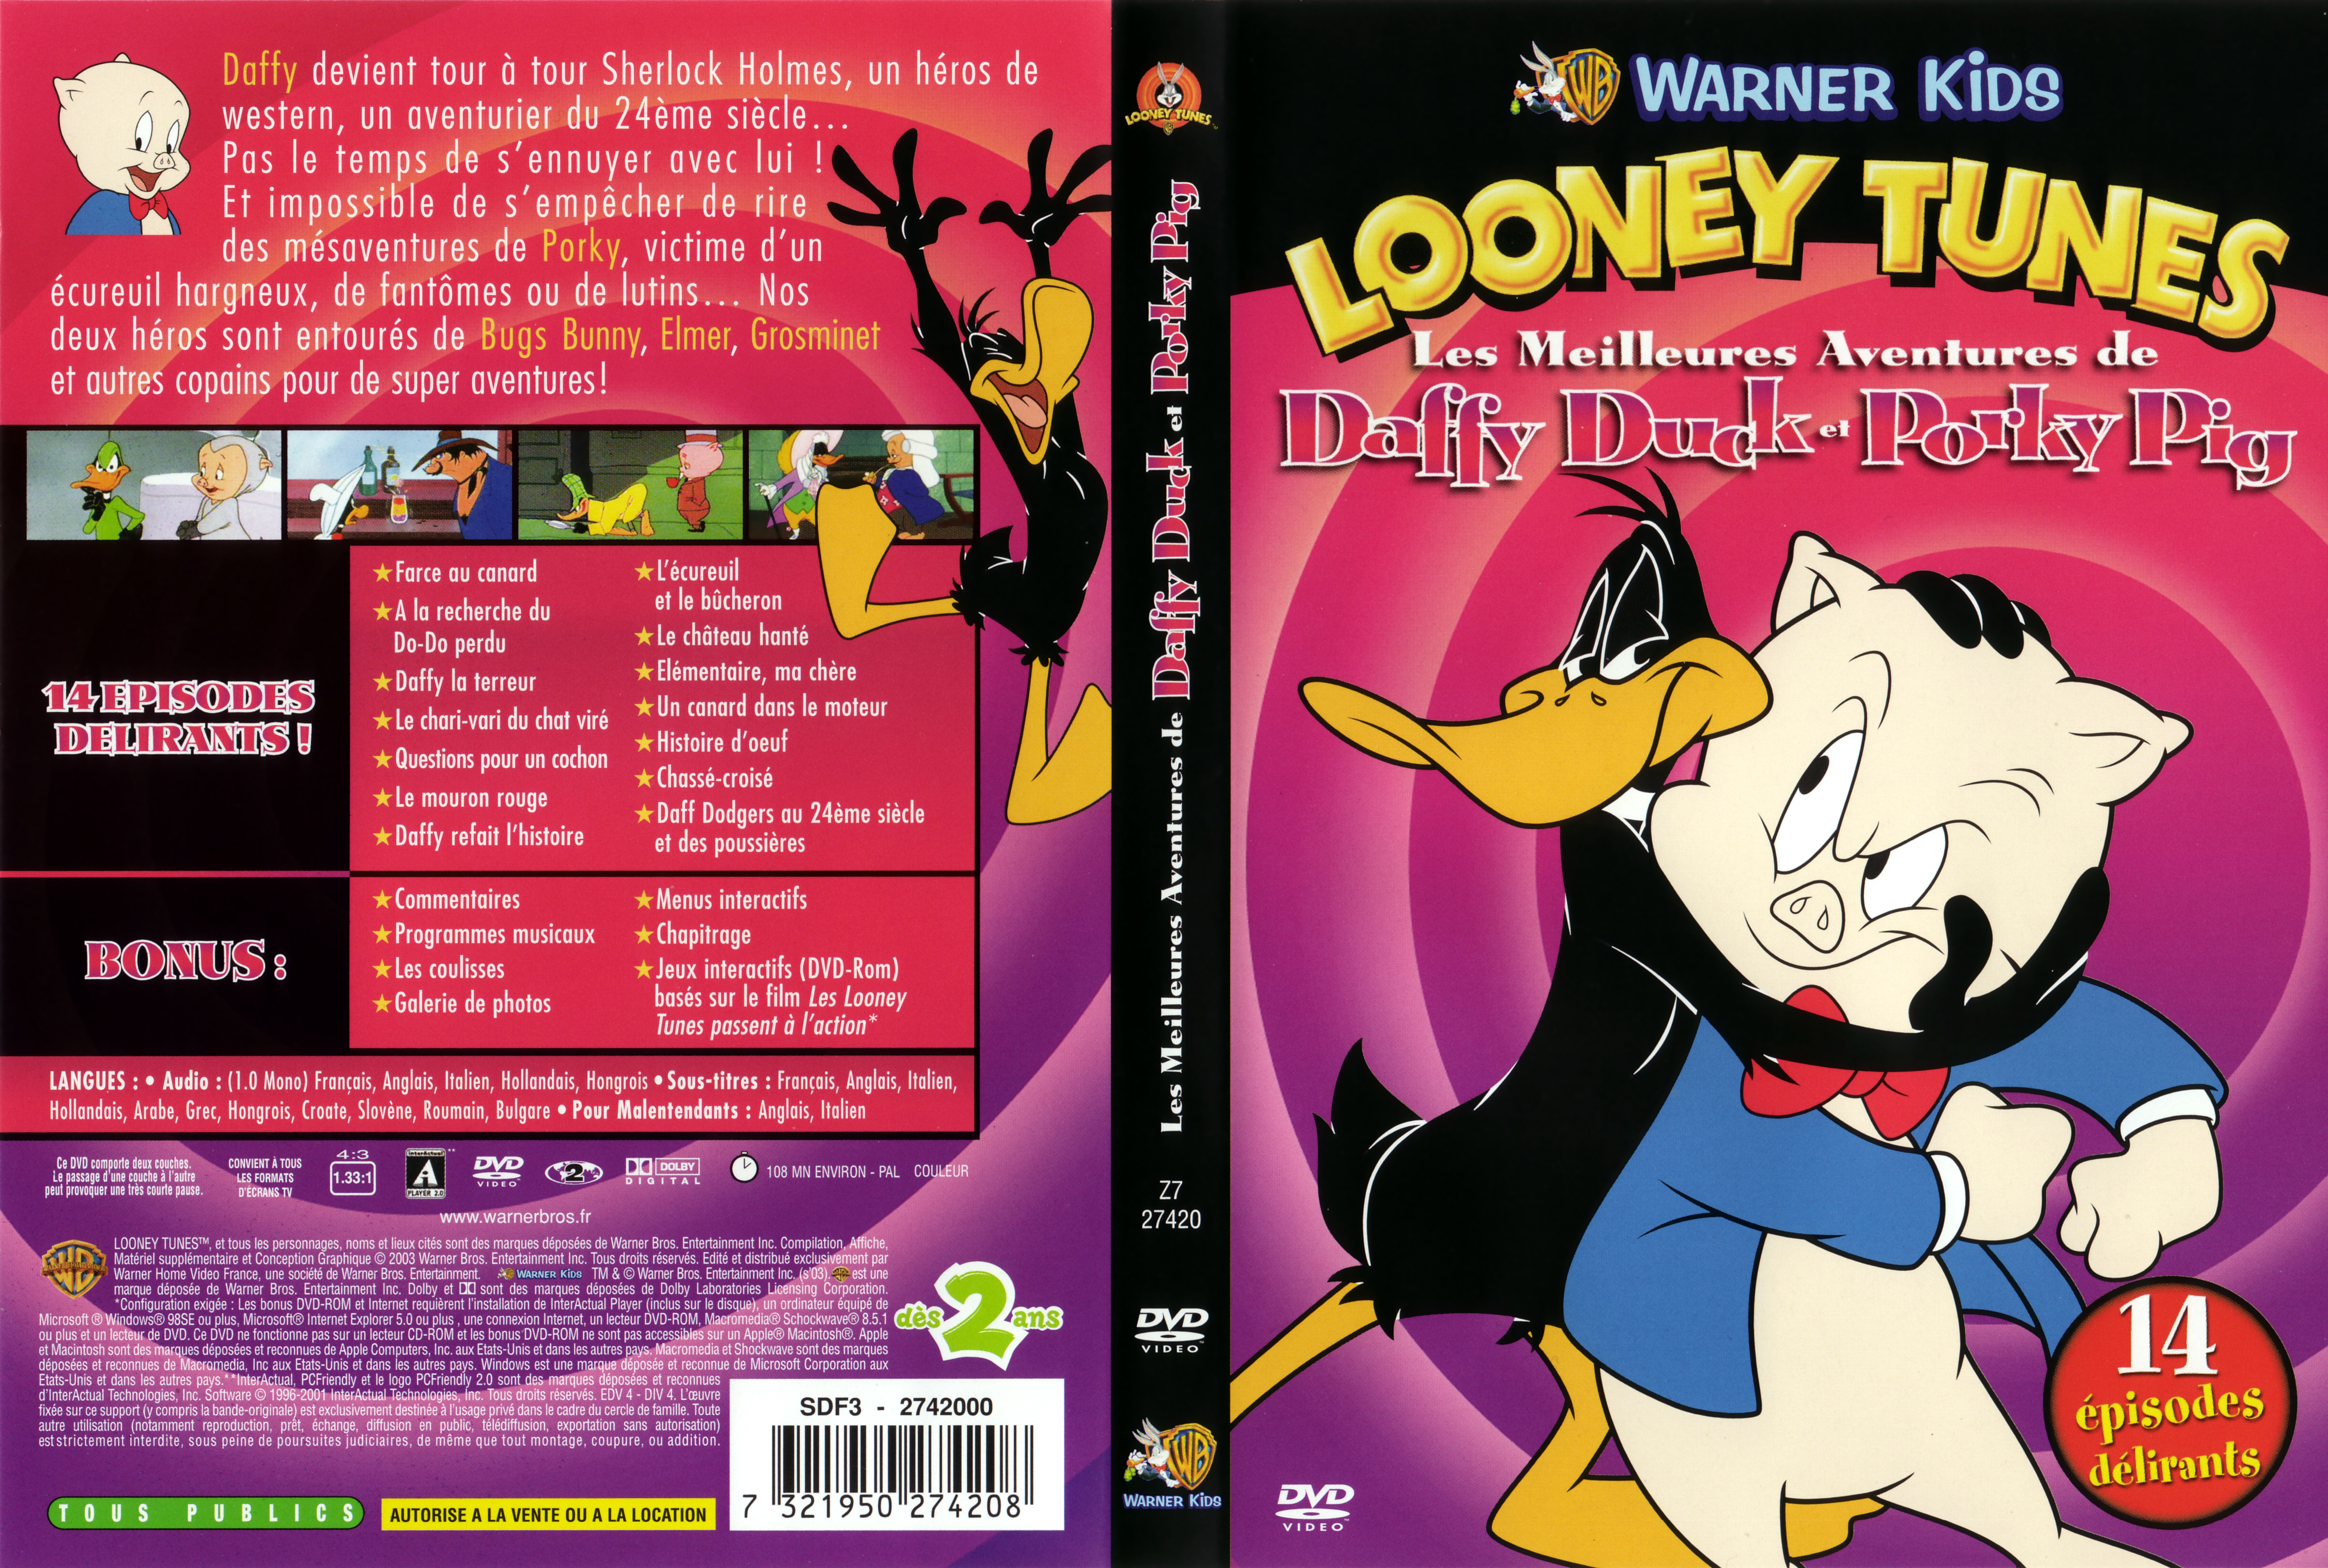 Jaquette DVD Looney Tunes - Daffy Duck et Porky Pig